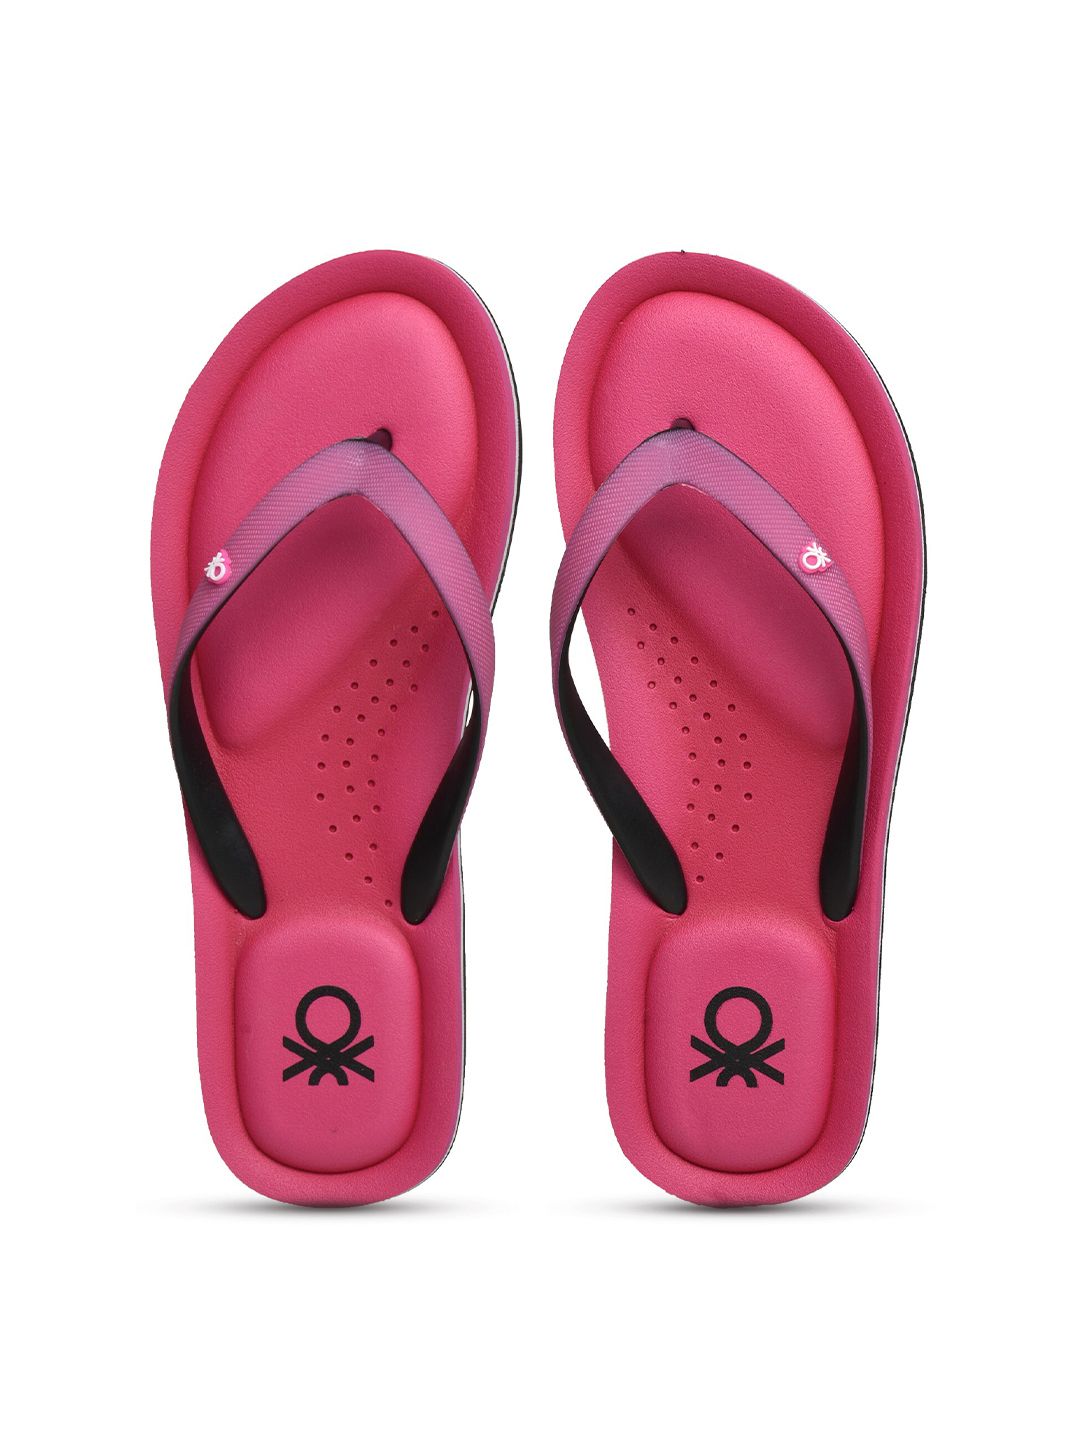 United Colors of Benetton Women Pink & White Thong Flip-Flops Price in India